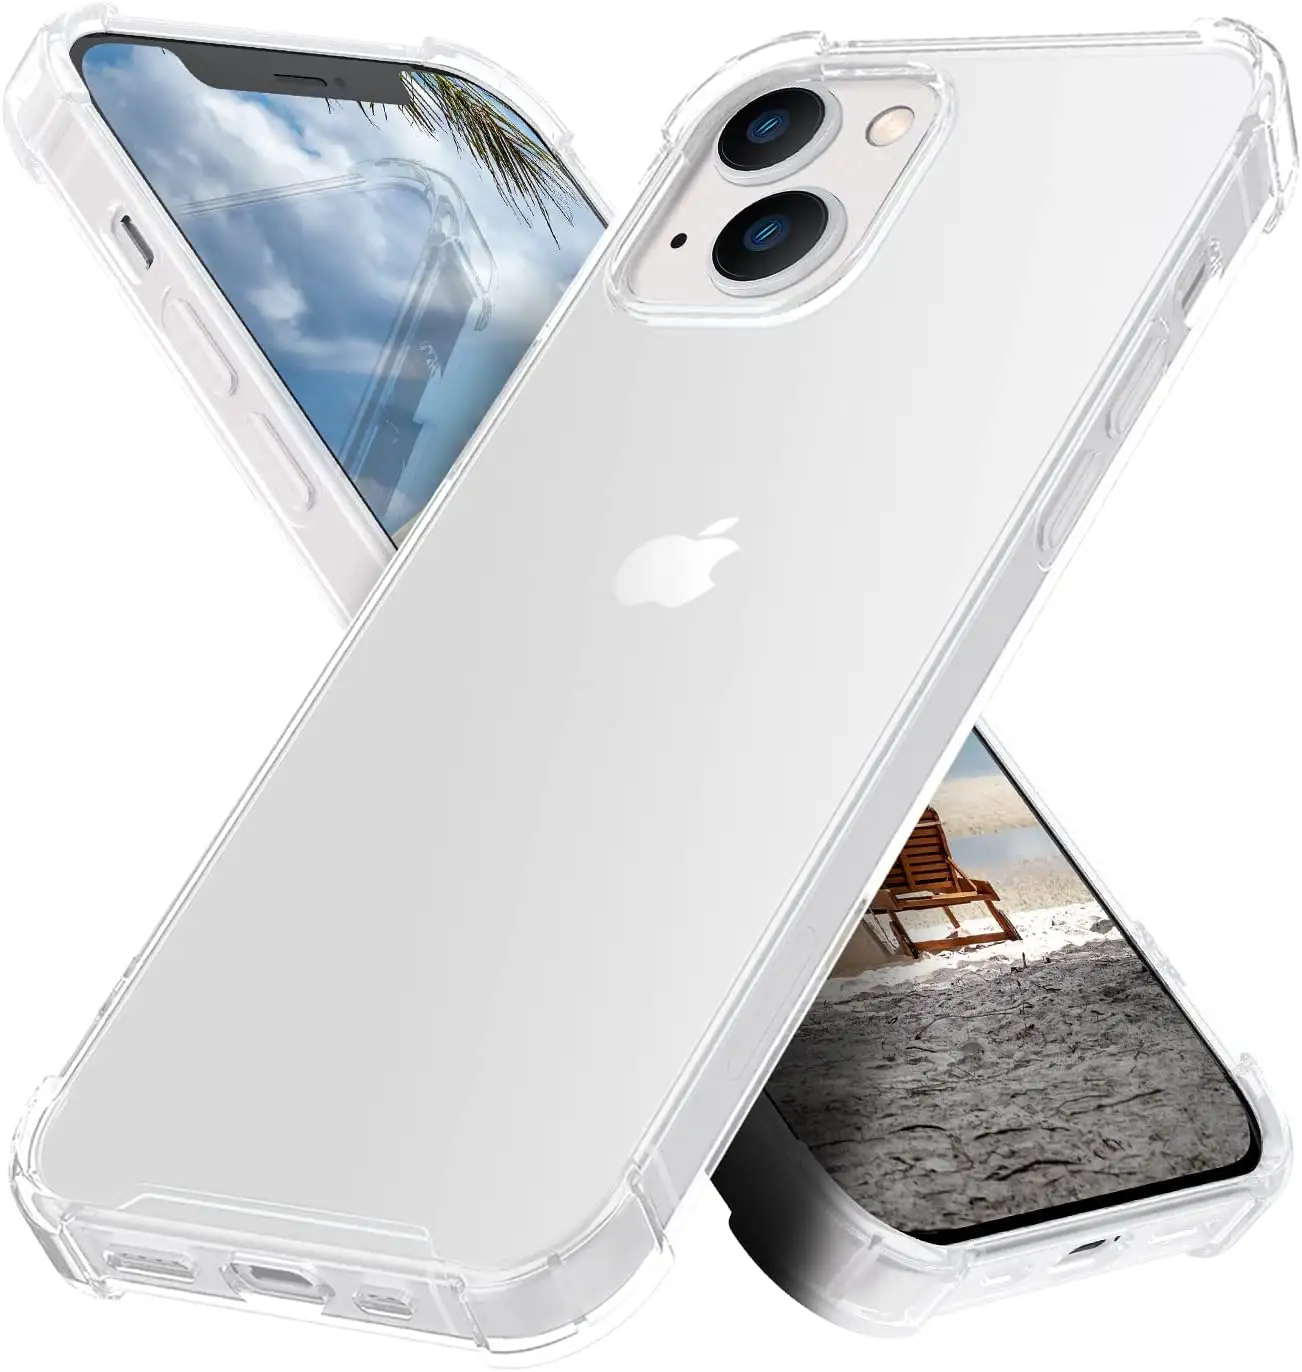 Case for iPhone 13 with 4 Corners Shockproof Protection Clear iphone 13 Case